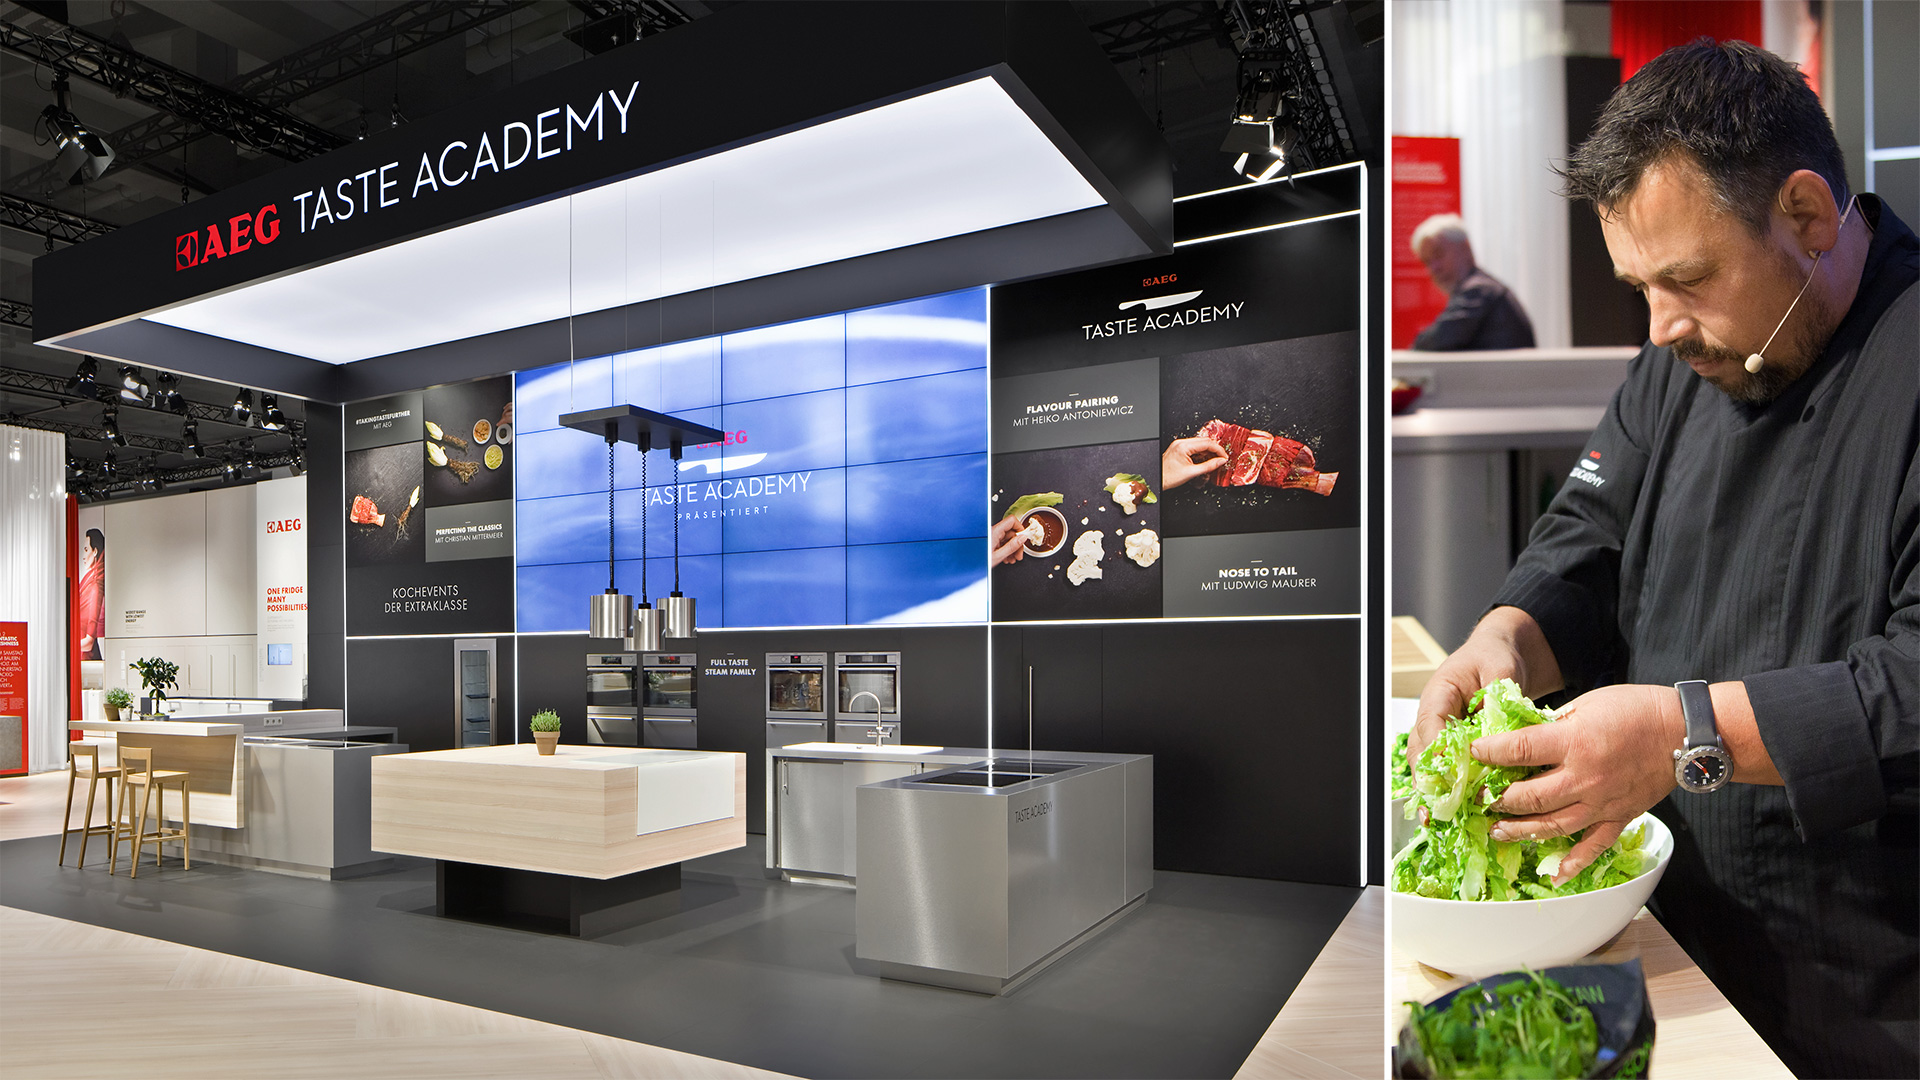 Dart stages the Electrolux fair stand at the IFA 2015